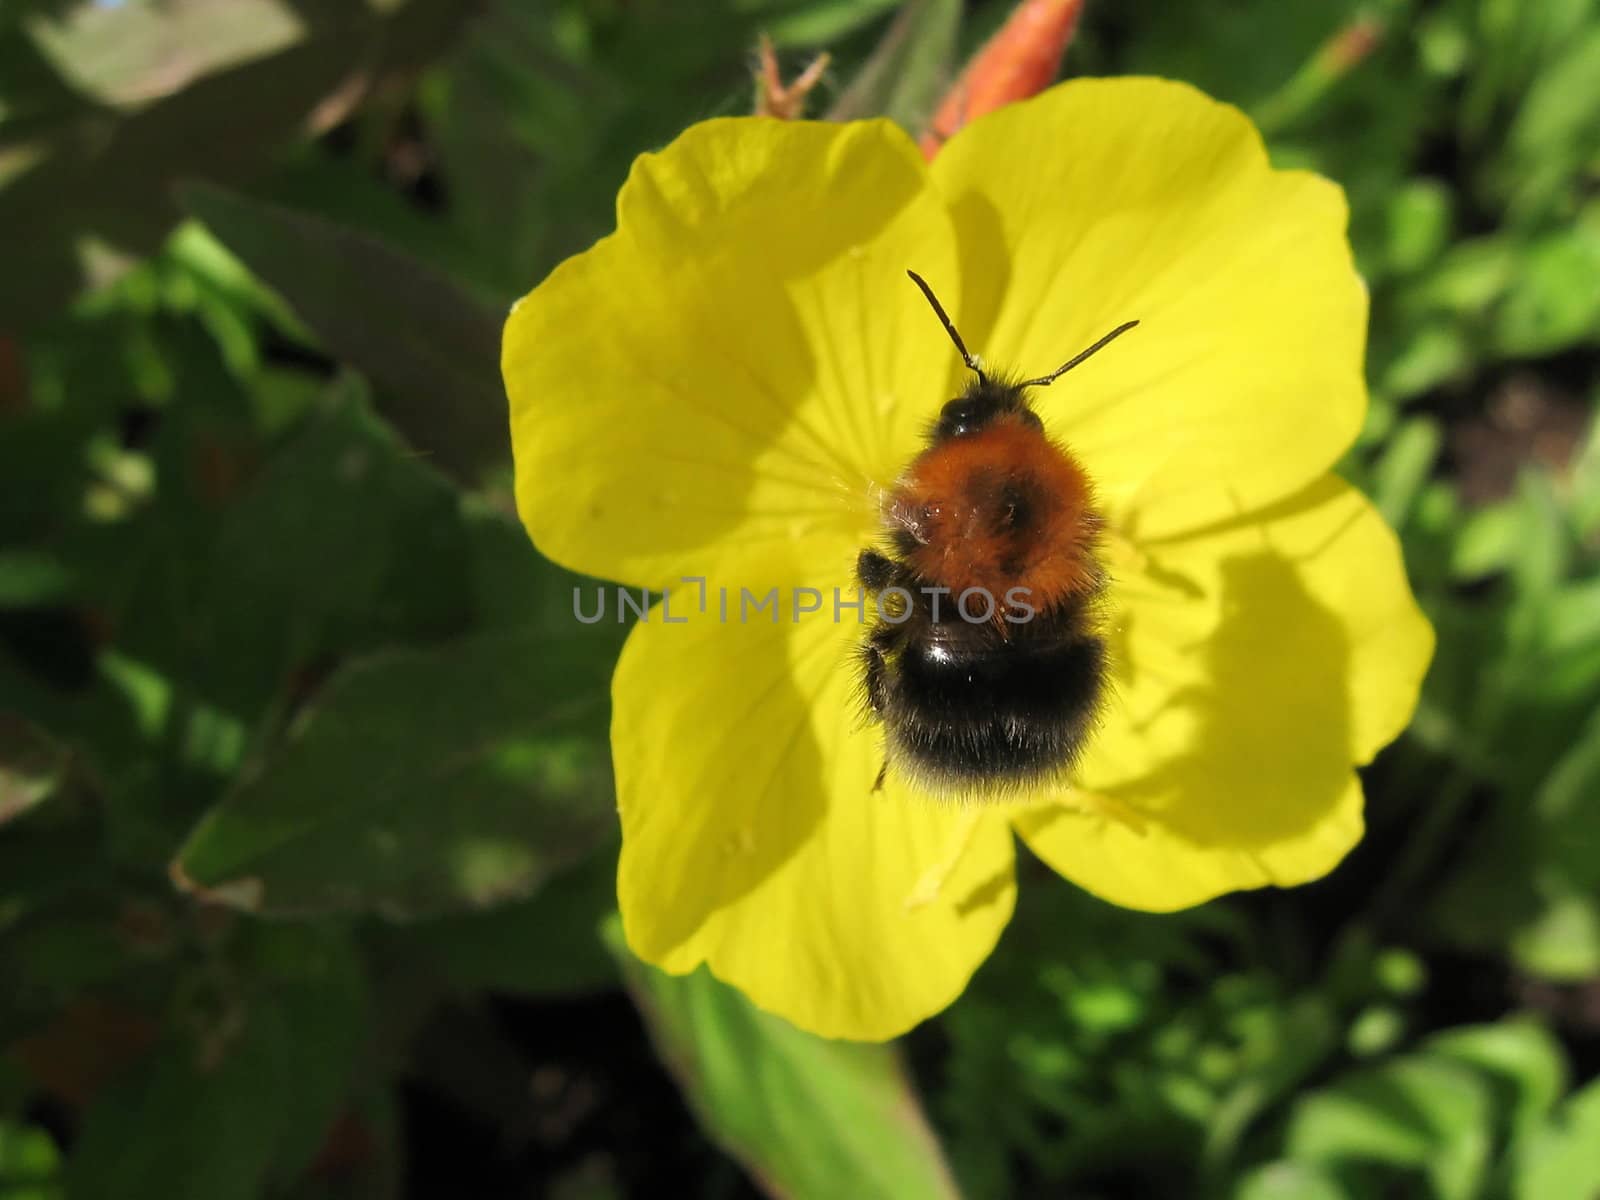 Bumble-bee on yellow flower by tomatto